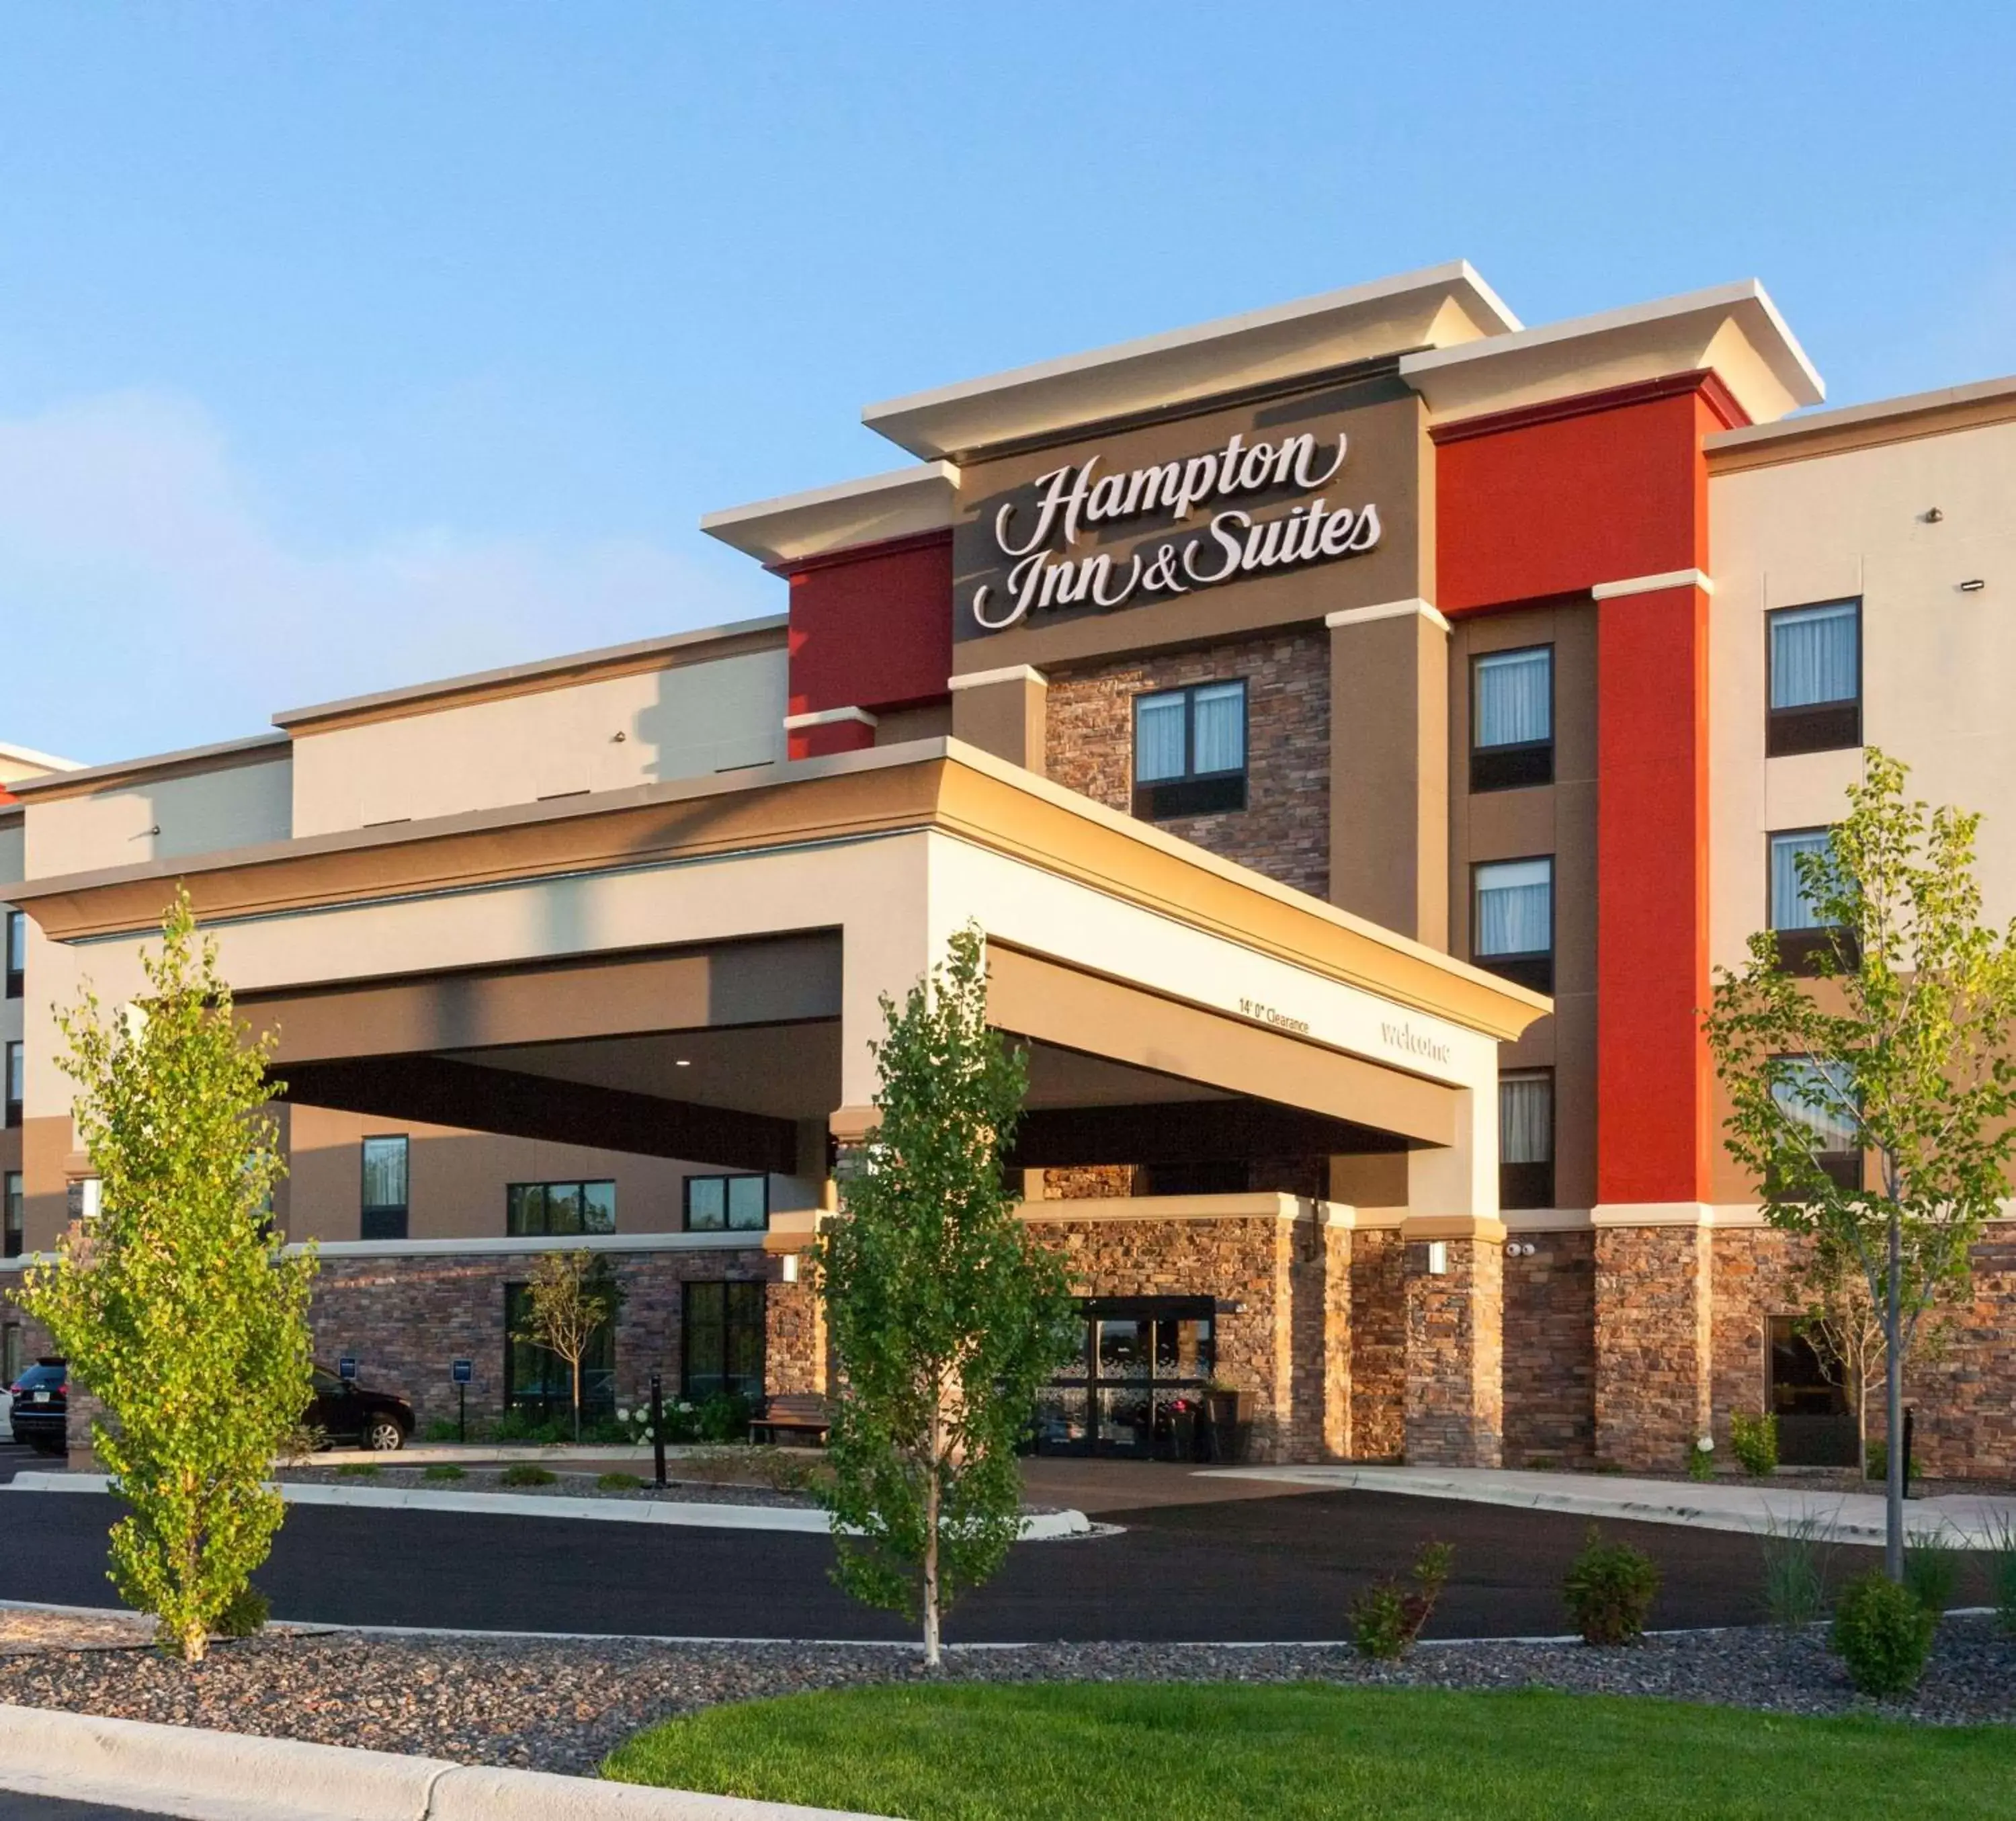 Property Building in Hampton Inn & Suites Duluth North Mn